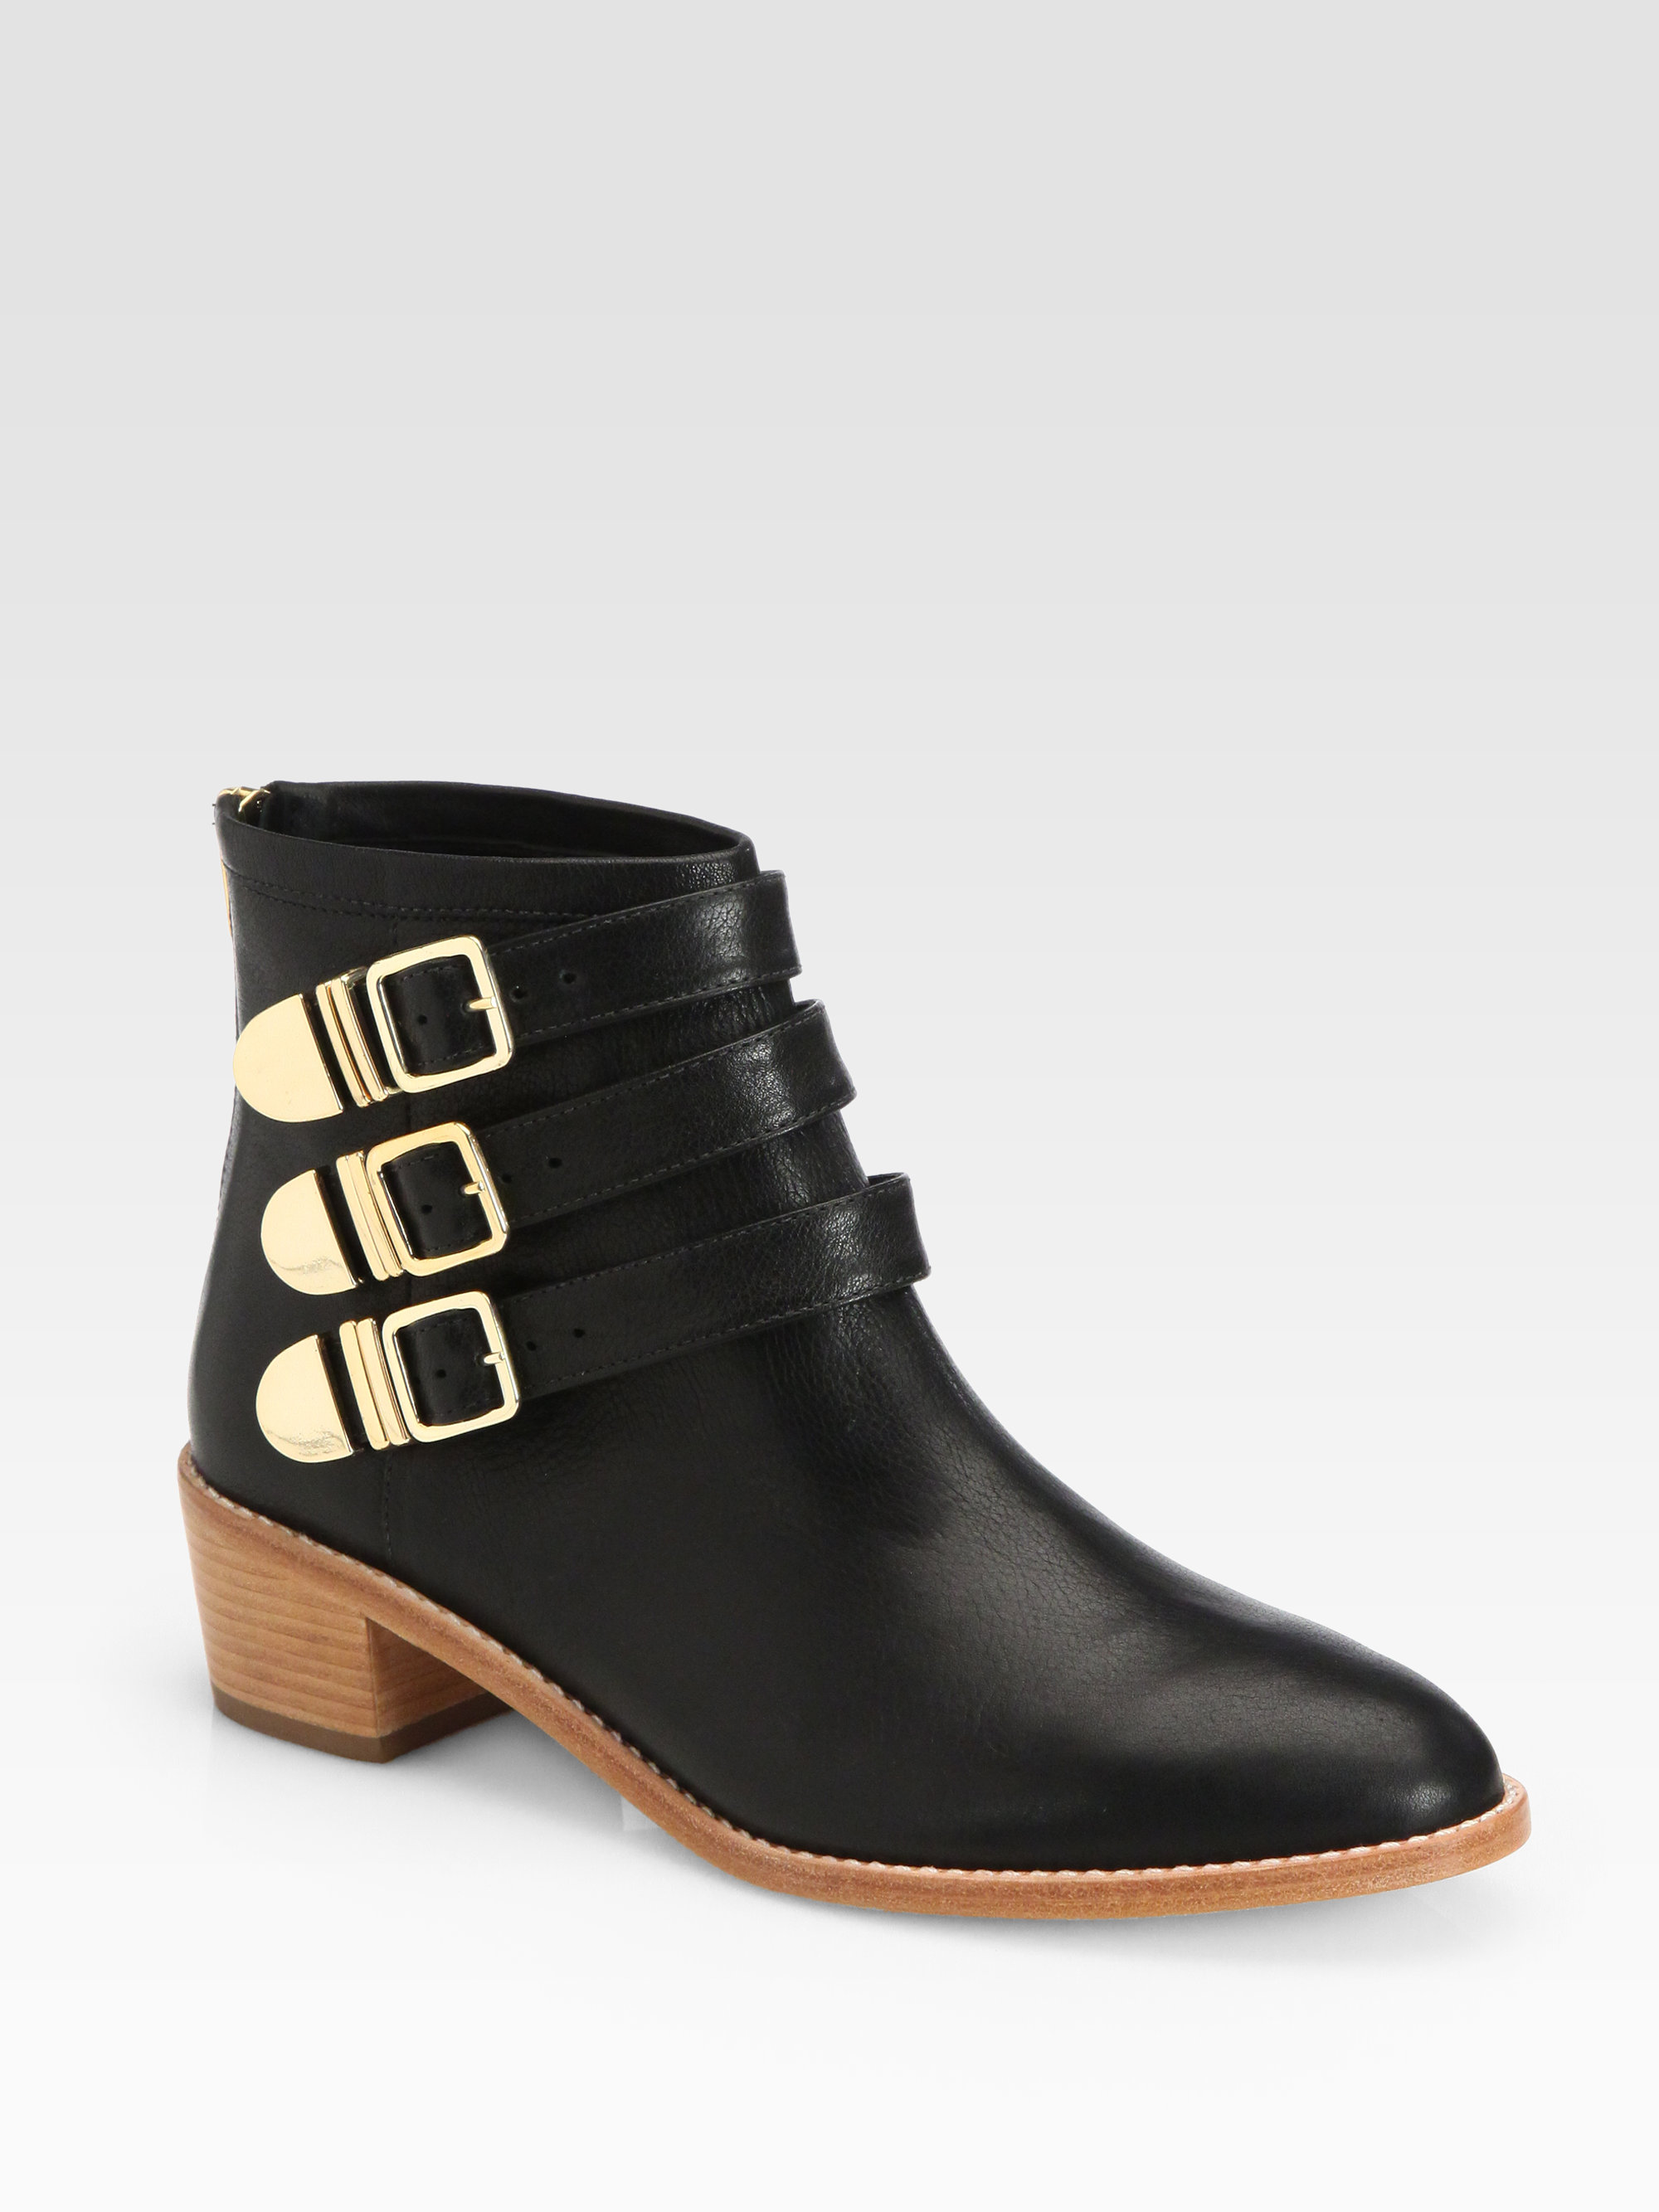 black ankle boots with gold buckles